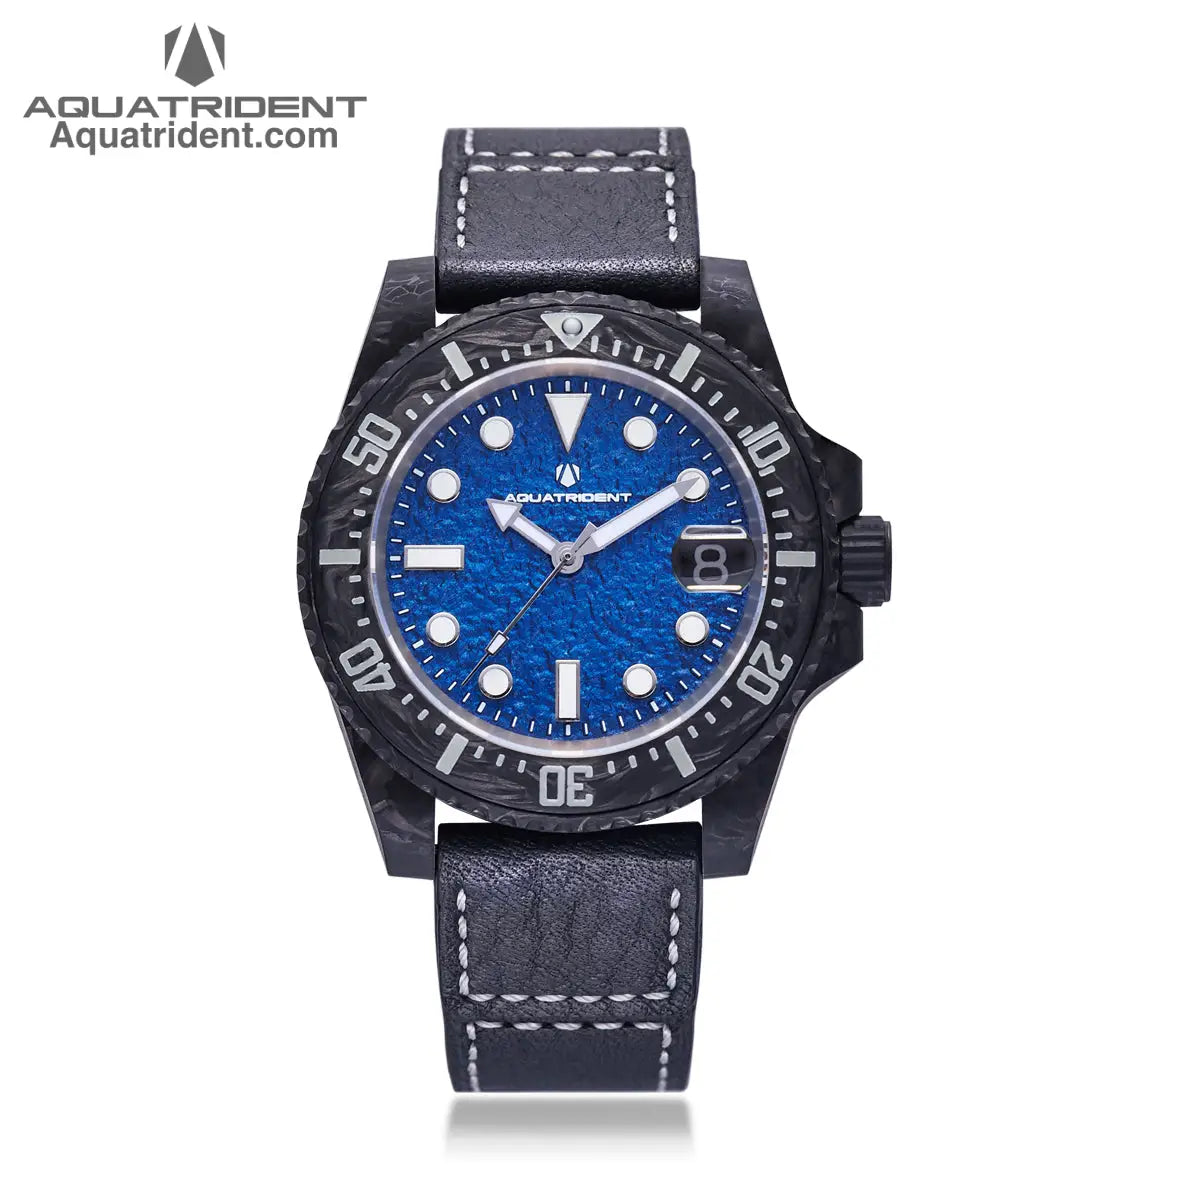 black carbon fiber case and bezel-Blue rough textured dial with dates-balck genuine leather strap-watch